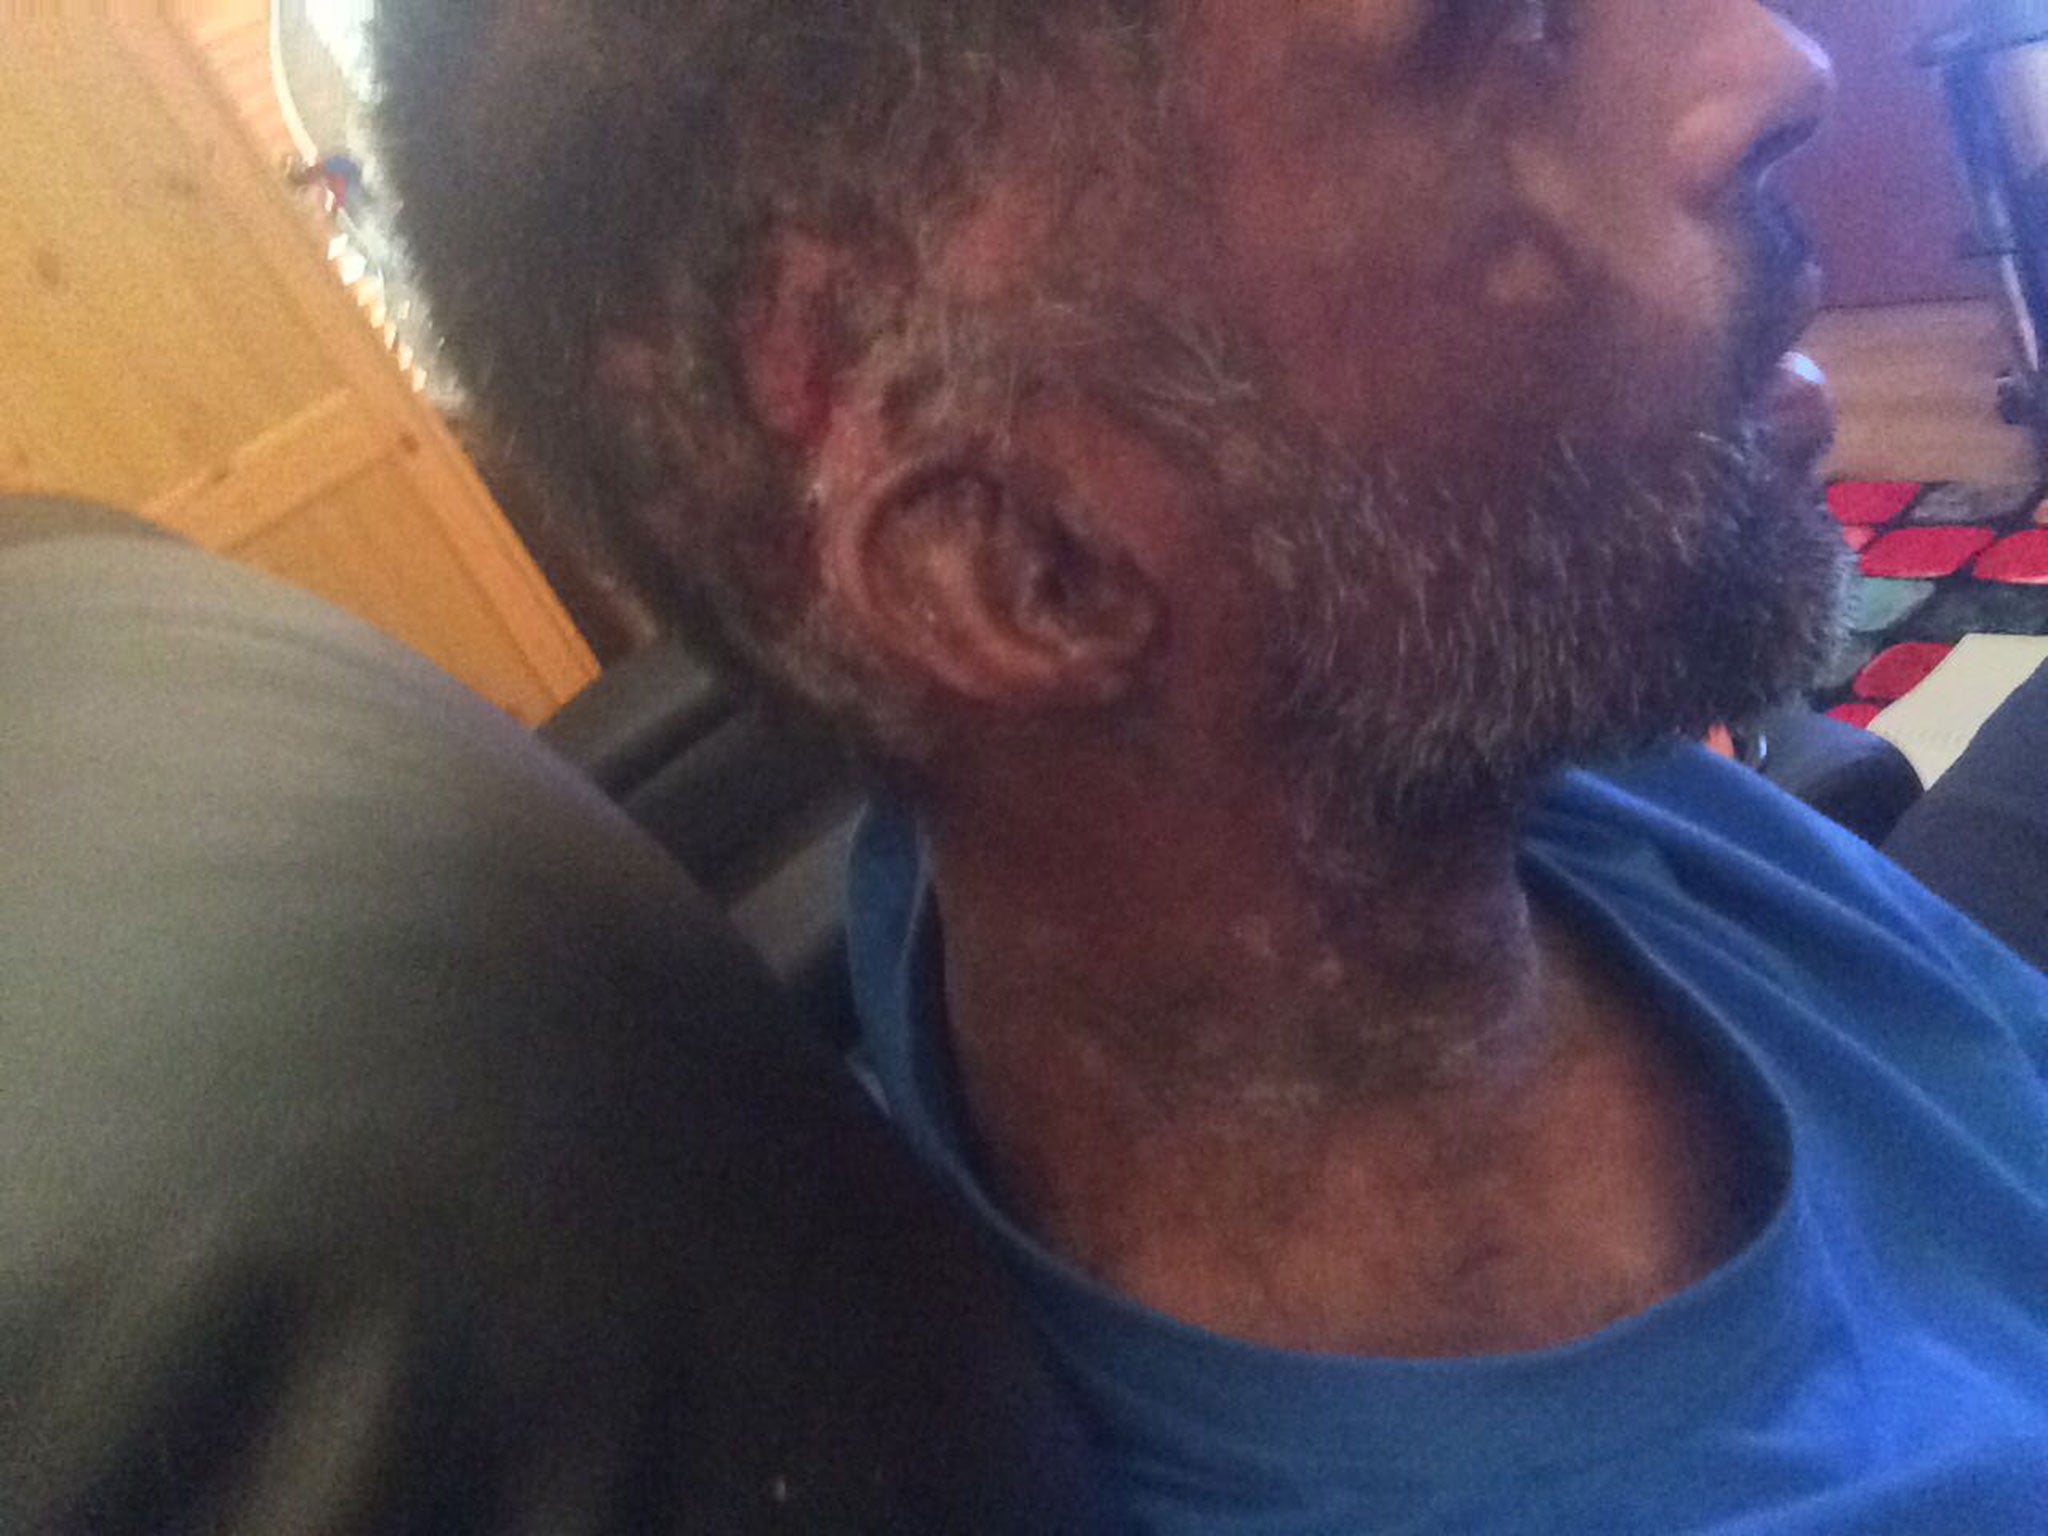 Jameel Mukhtar, 37, is deaf in one ear following an acid attack on 21 June